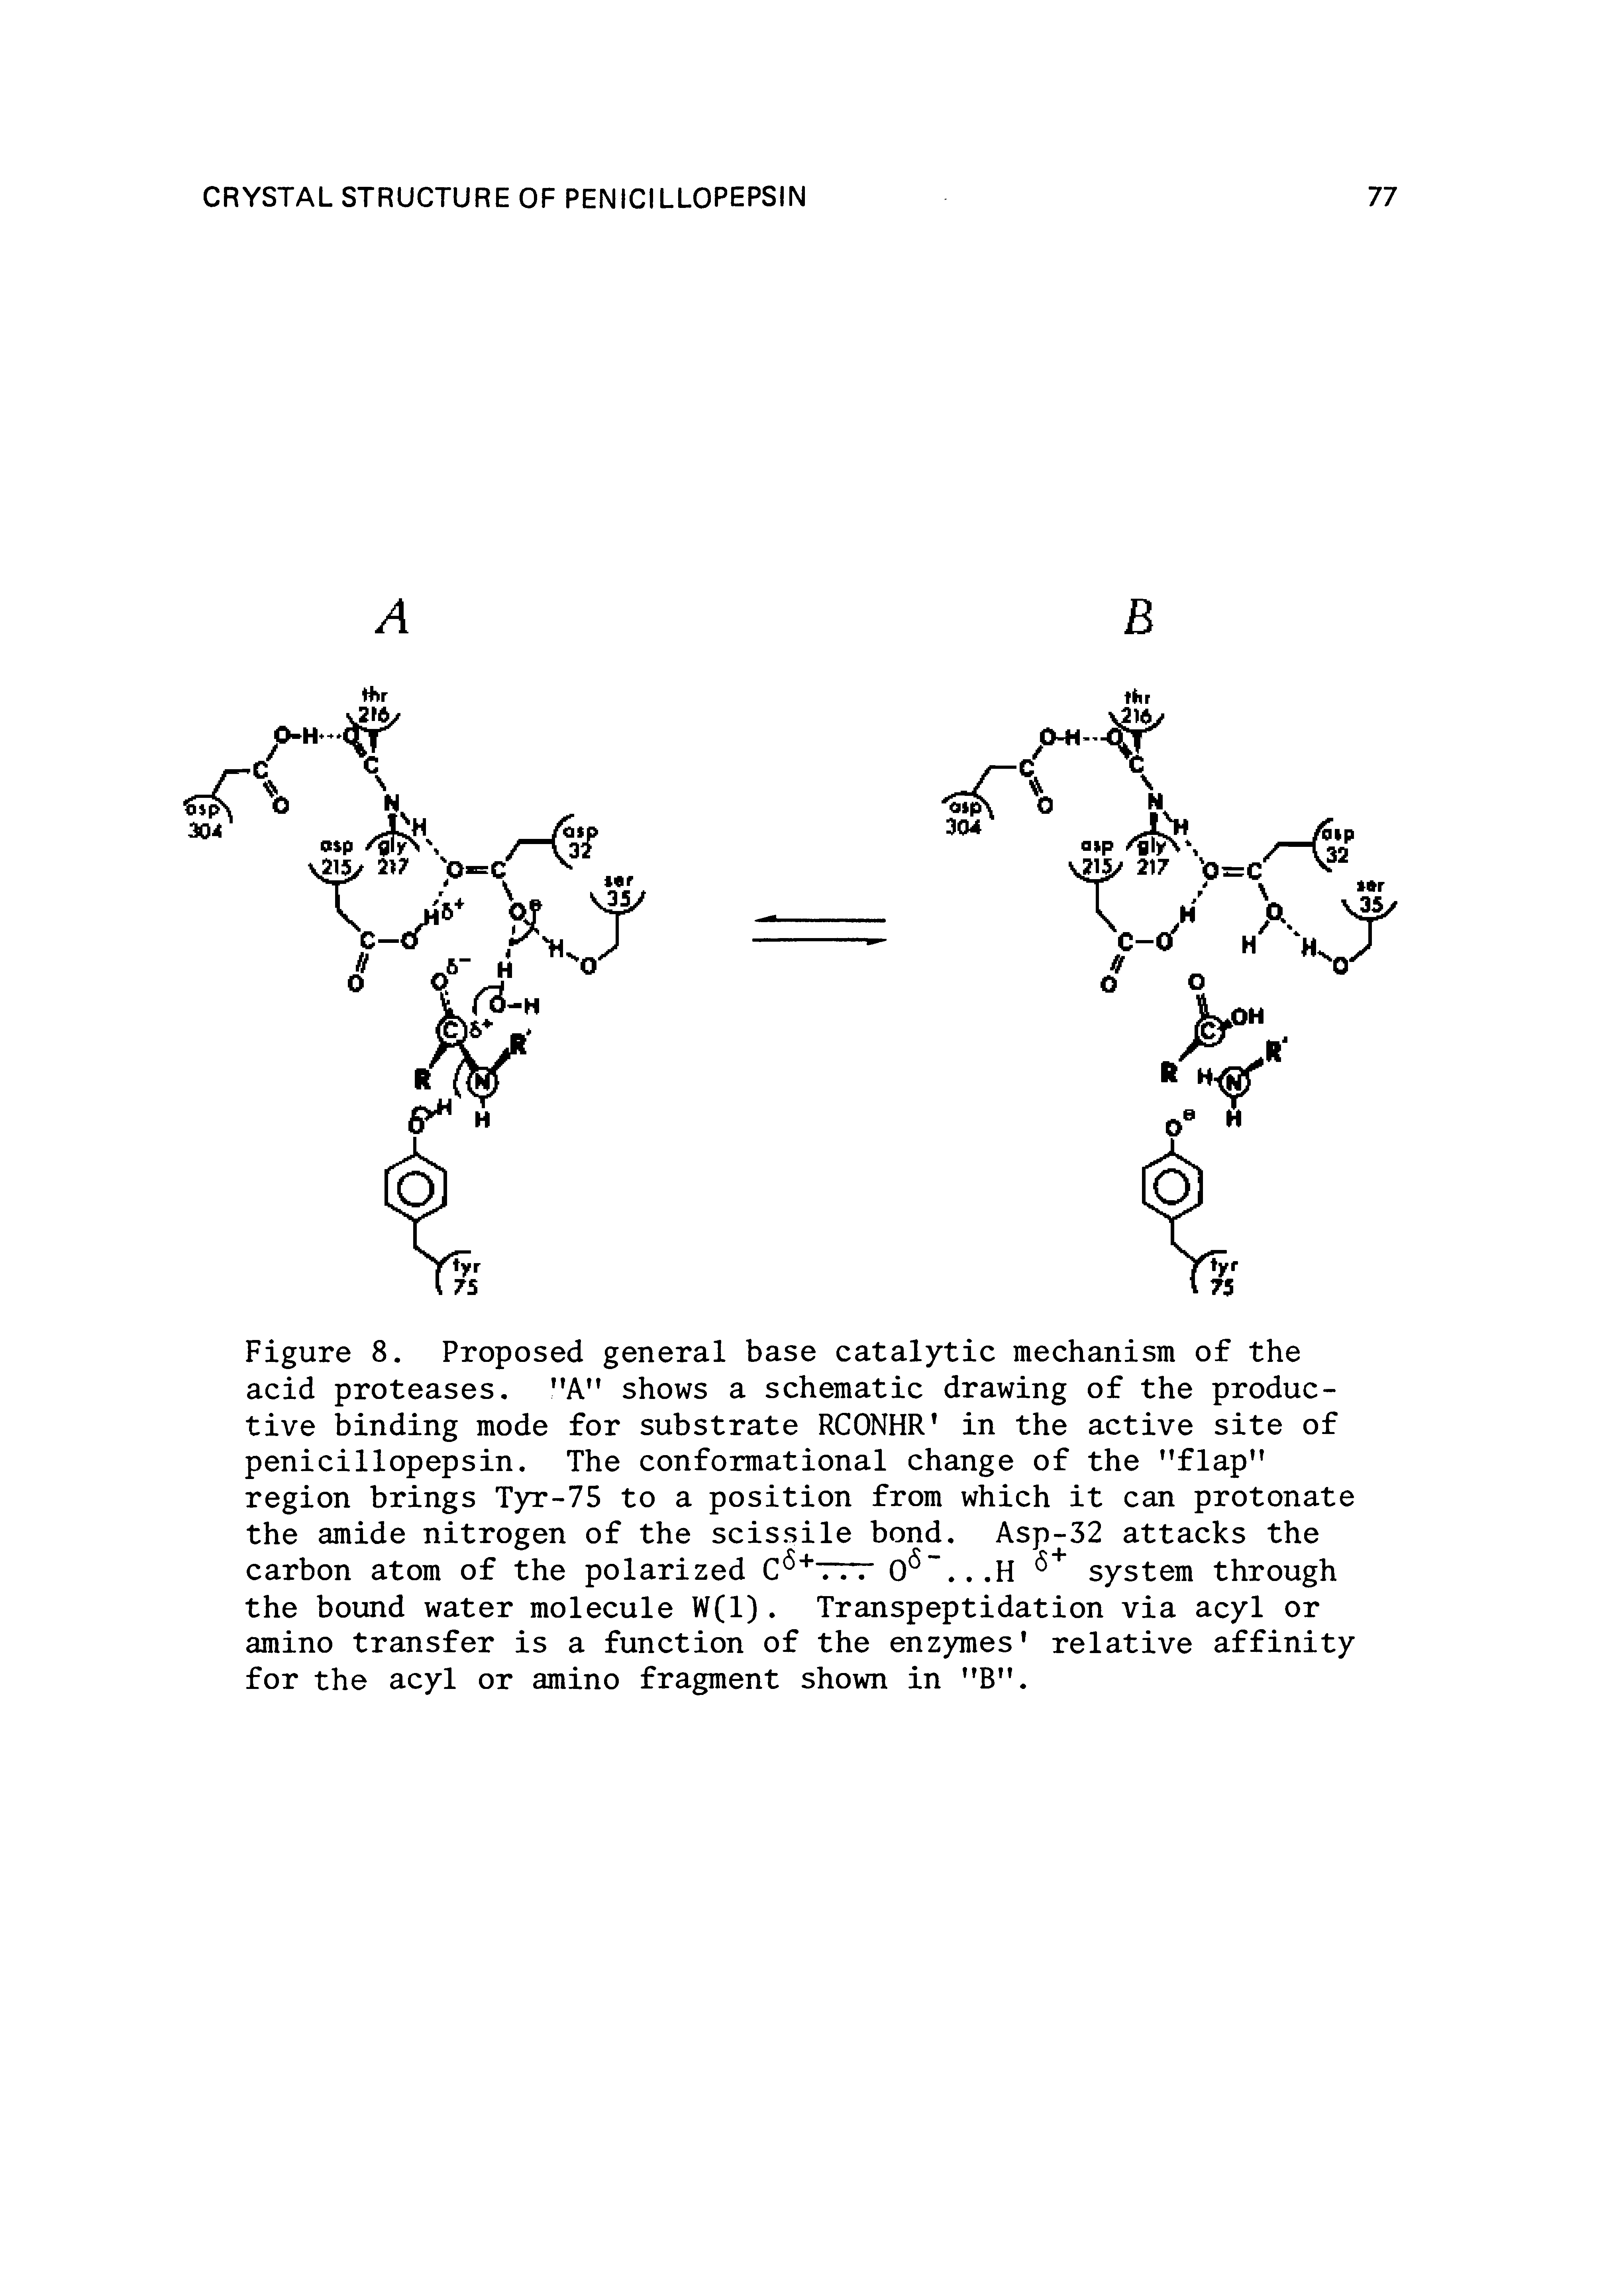 Figure 8. Proposed general base catalytic mechanism of the acid proteases. "A" shows a schematic drawing of the productive binding mode for substrate RCONHR in the active site of penicillopepsin. The conformational change of the flap region brings Tyr-75 to a position from which it can protonate the amide nitrogen of the scissile bond. Asp-32 attacks the carbon atom of the polarized system through...